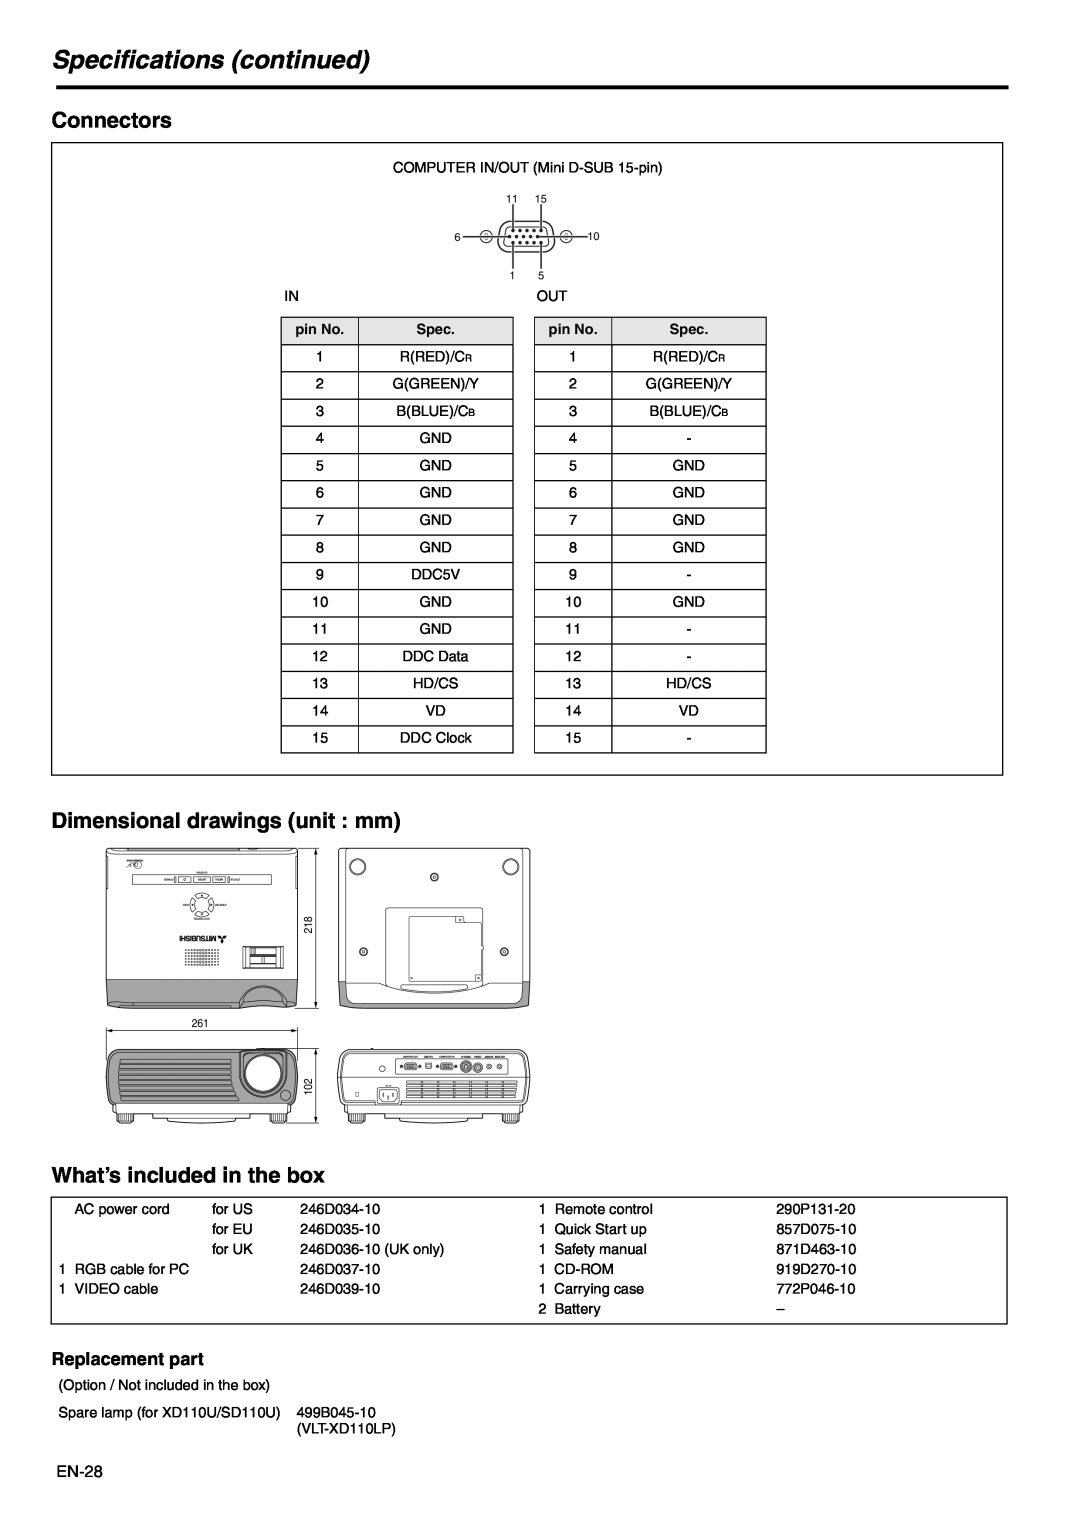 Mitsubishi Electronics XD110, SD110 user manual Specifications continued, Connectors, Dimensional drawings unit mm, pin No 